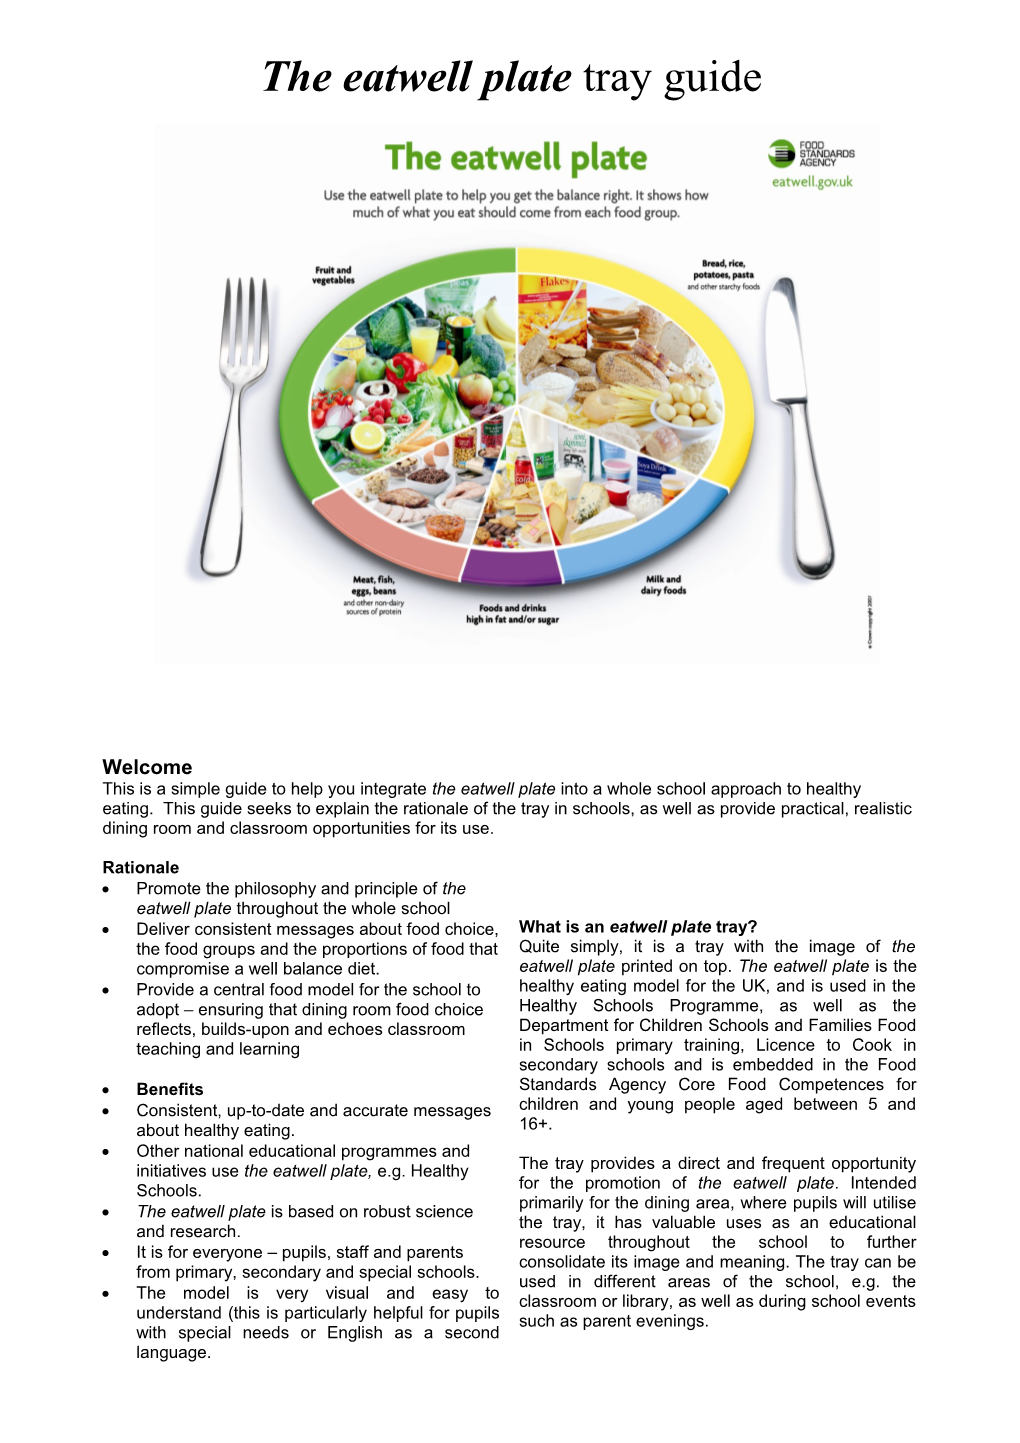 The Eatwell Plate Tray Guide